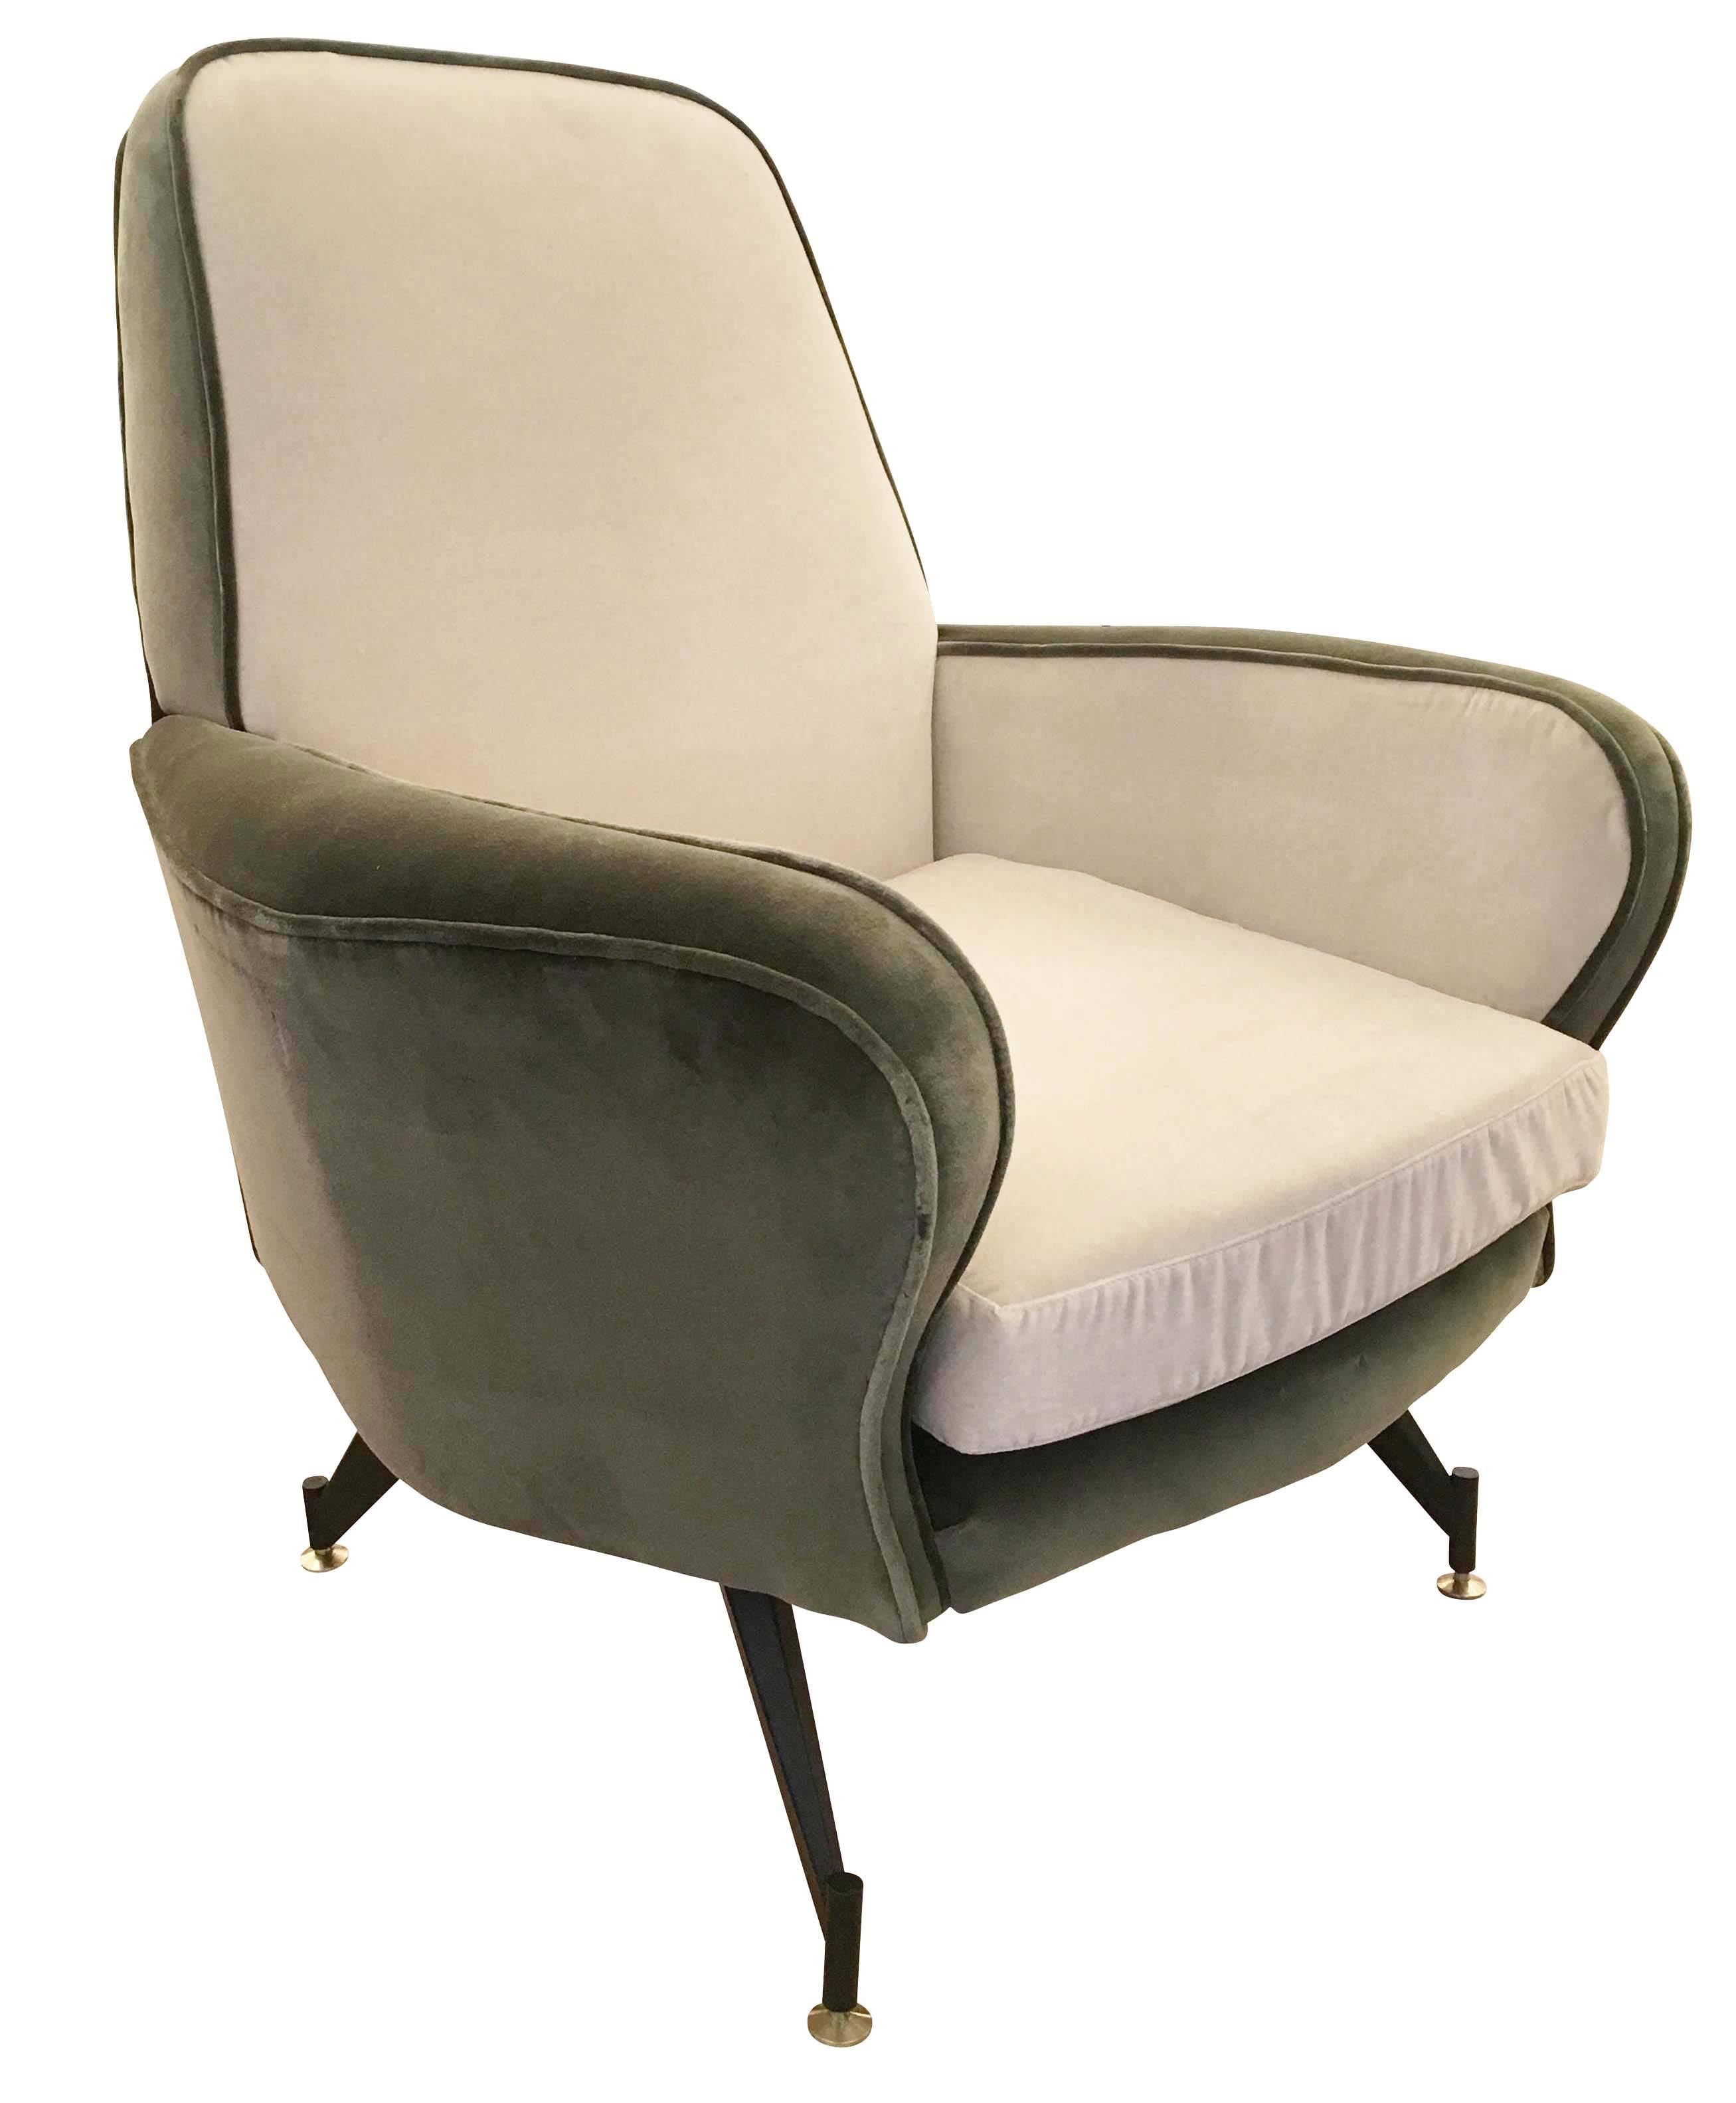 Pair of Italian midcentury lounge chairs attributed to Formanova. Upholstered in a green and off-white velvet. Legs are lacquered black and feet are brass.
